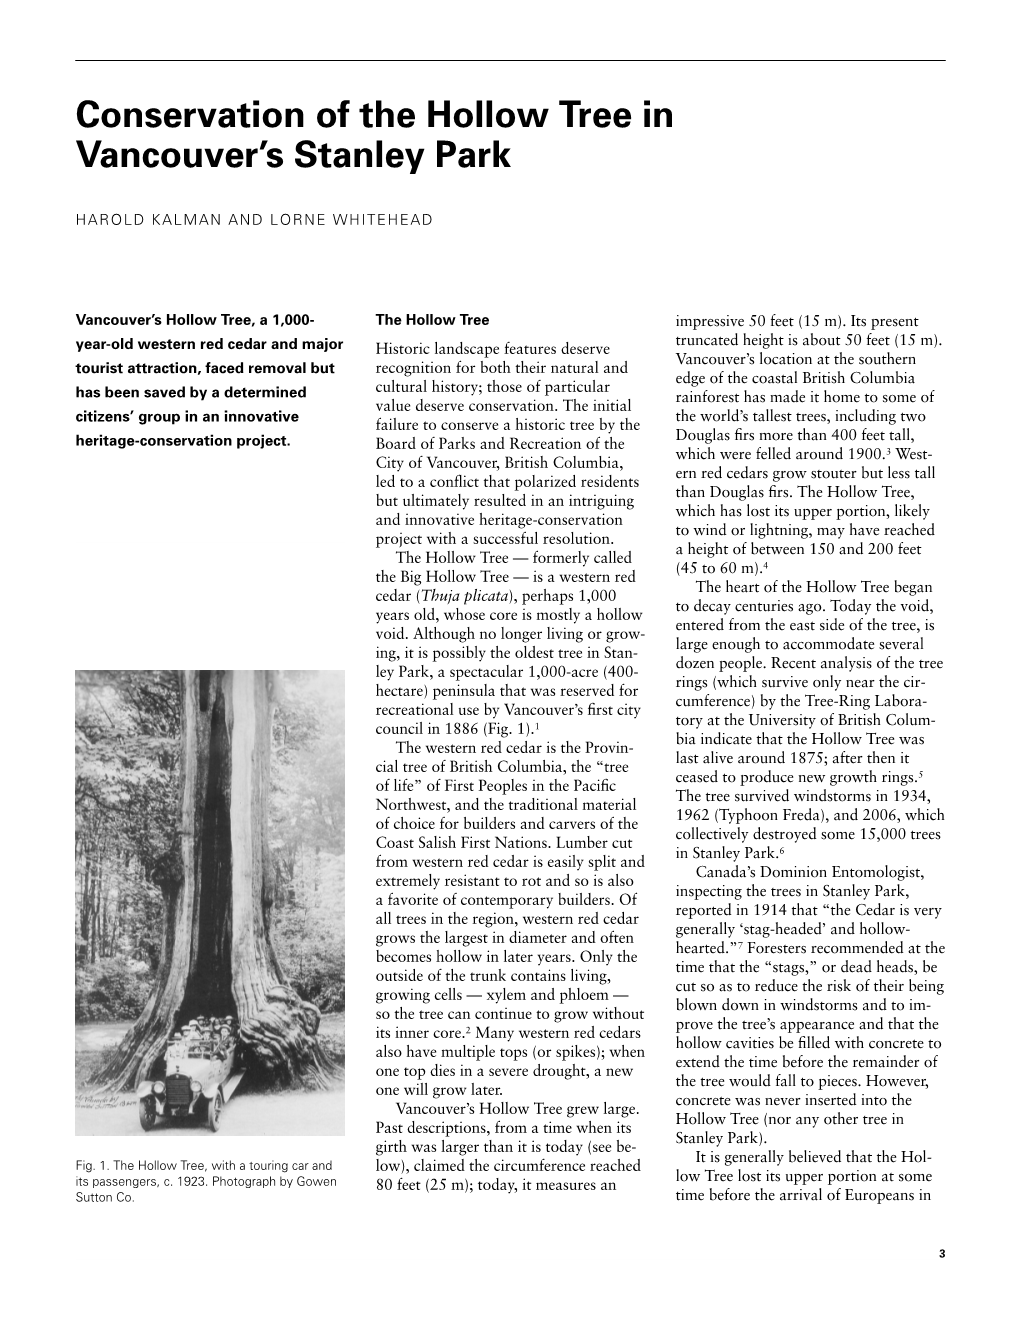 Conservation of the Hollow Tree in Vancouver's Stanley Park